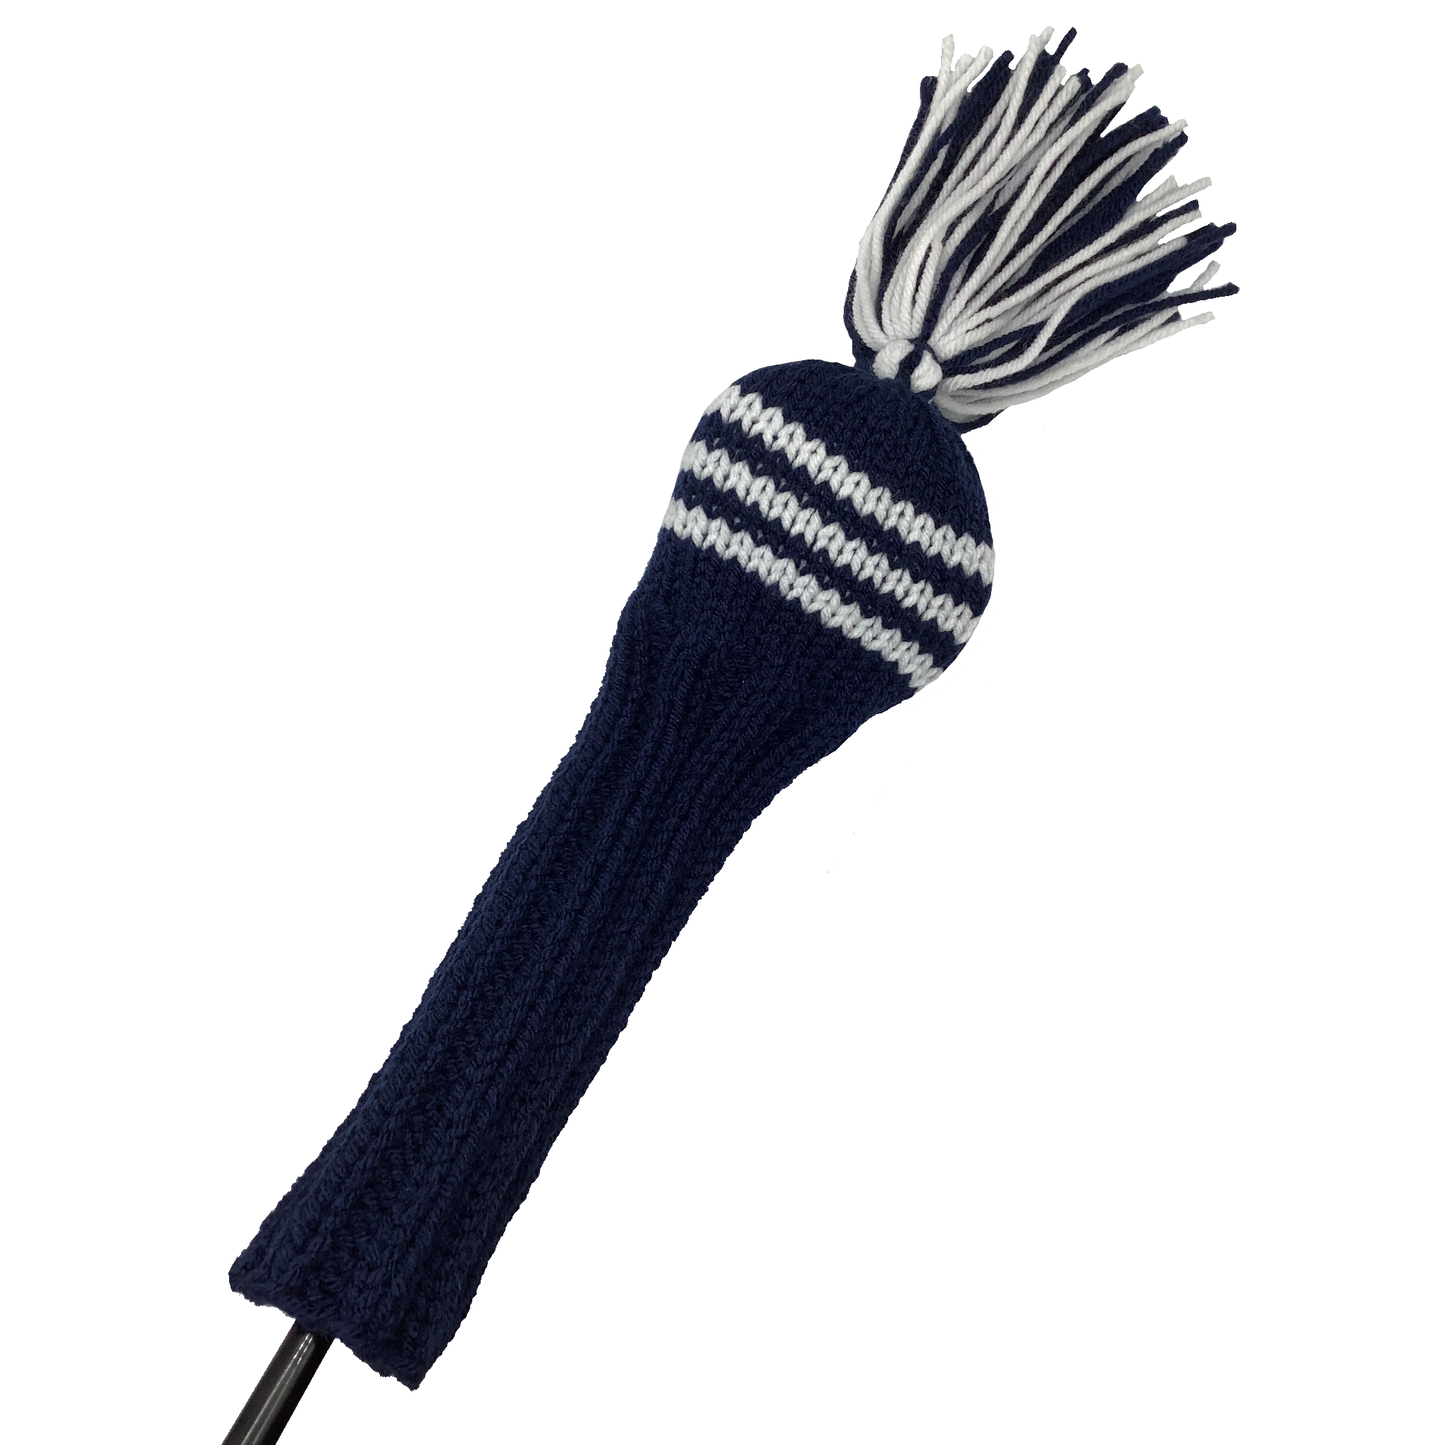 Navy and White - Fairway Wood #3 Headcover